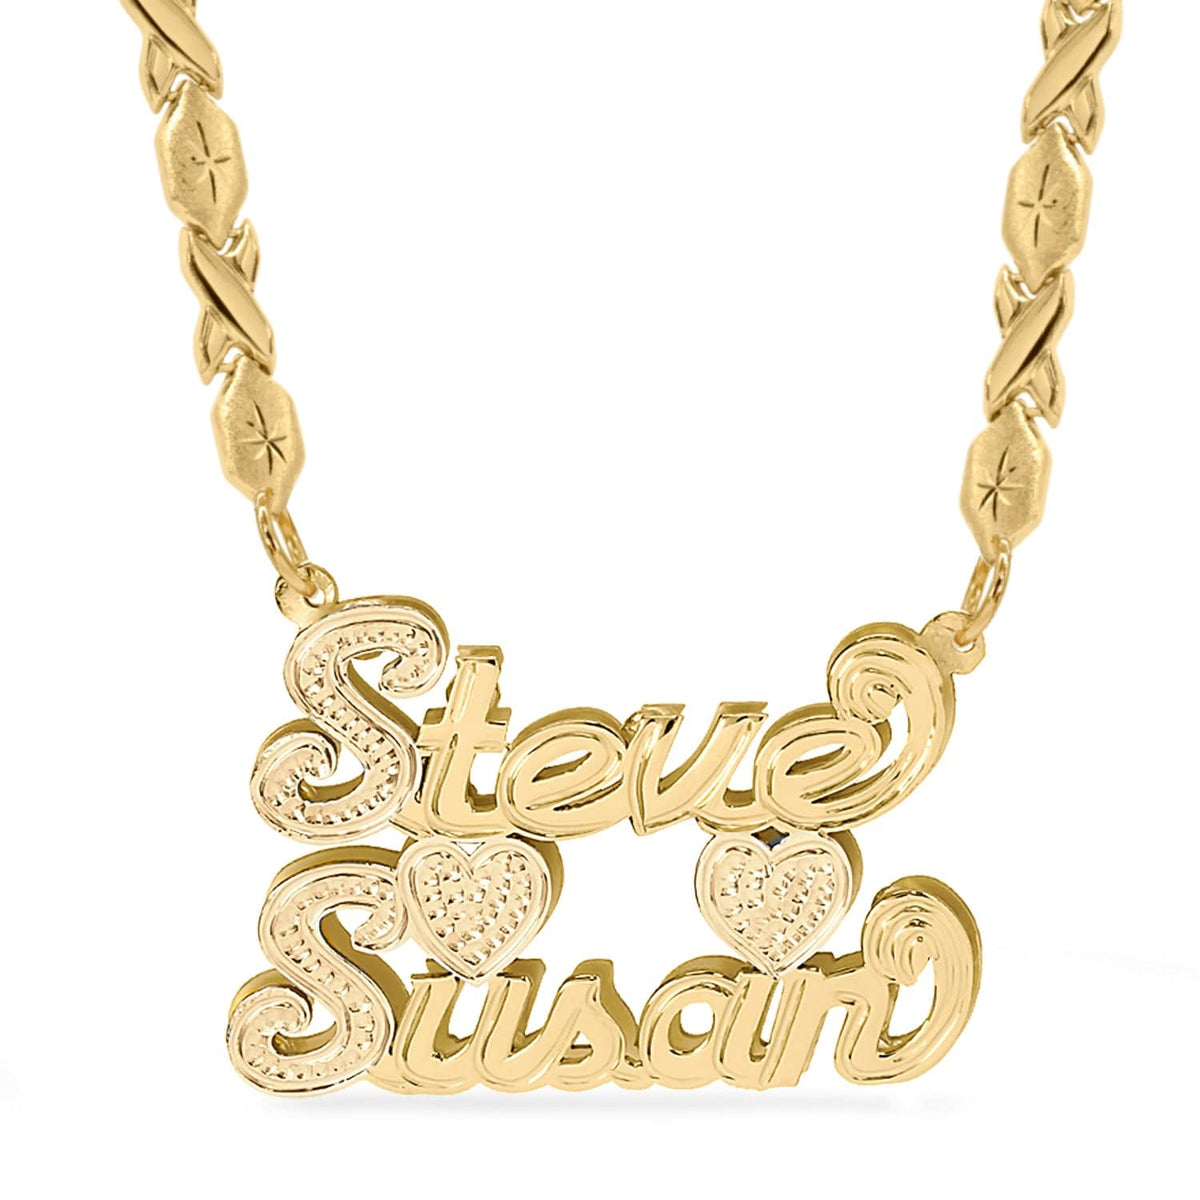 14k Gold over Sterling Silver / Xoxo Chain Double Plated Name Necklace - Couples - Best Friends